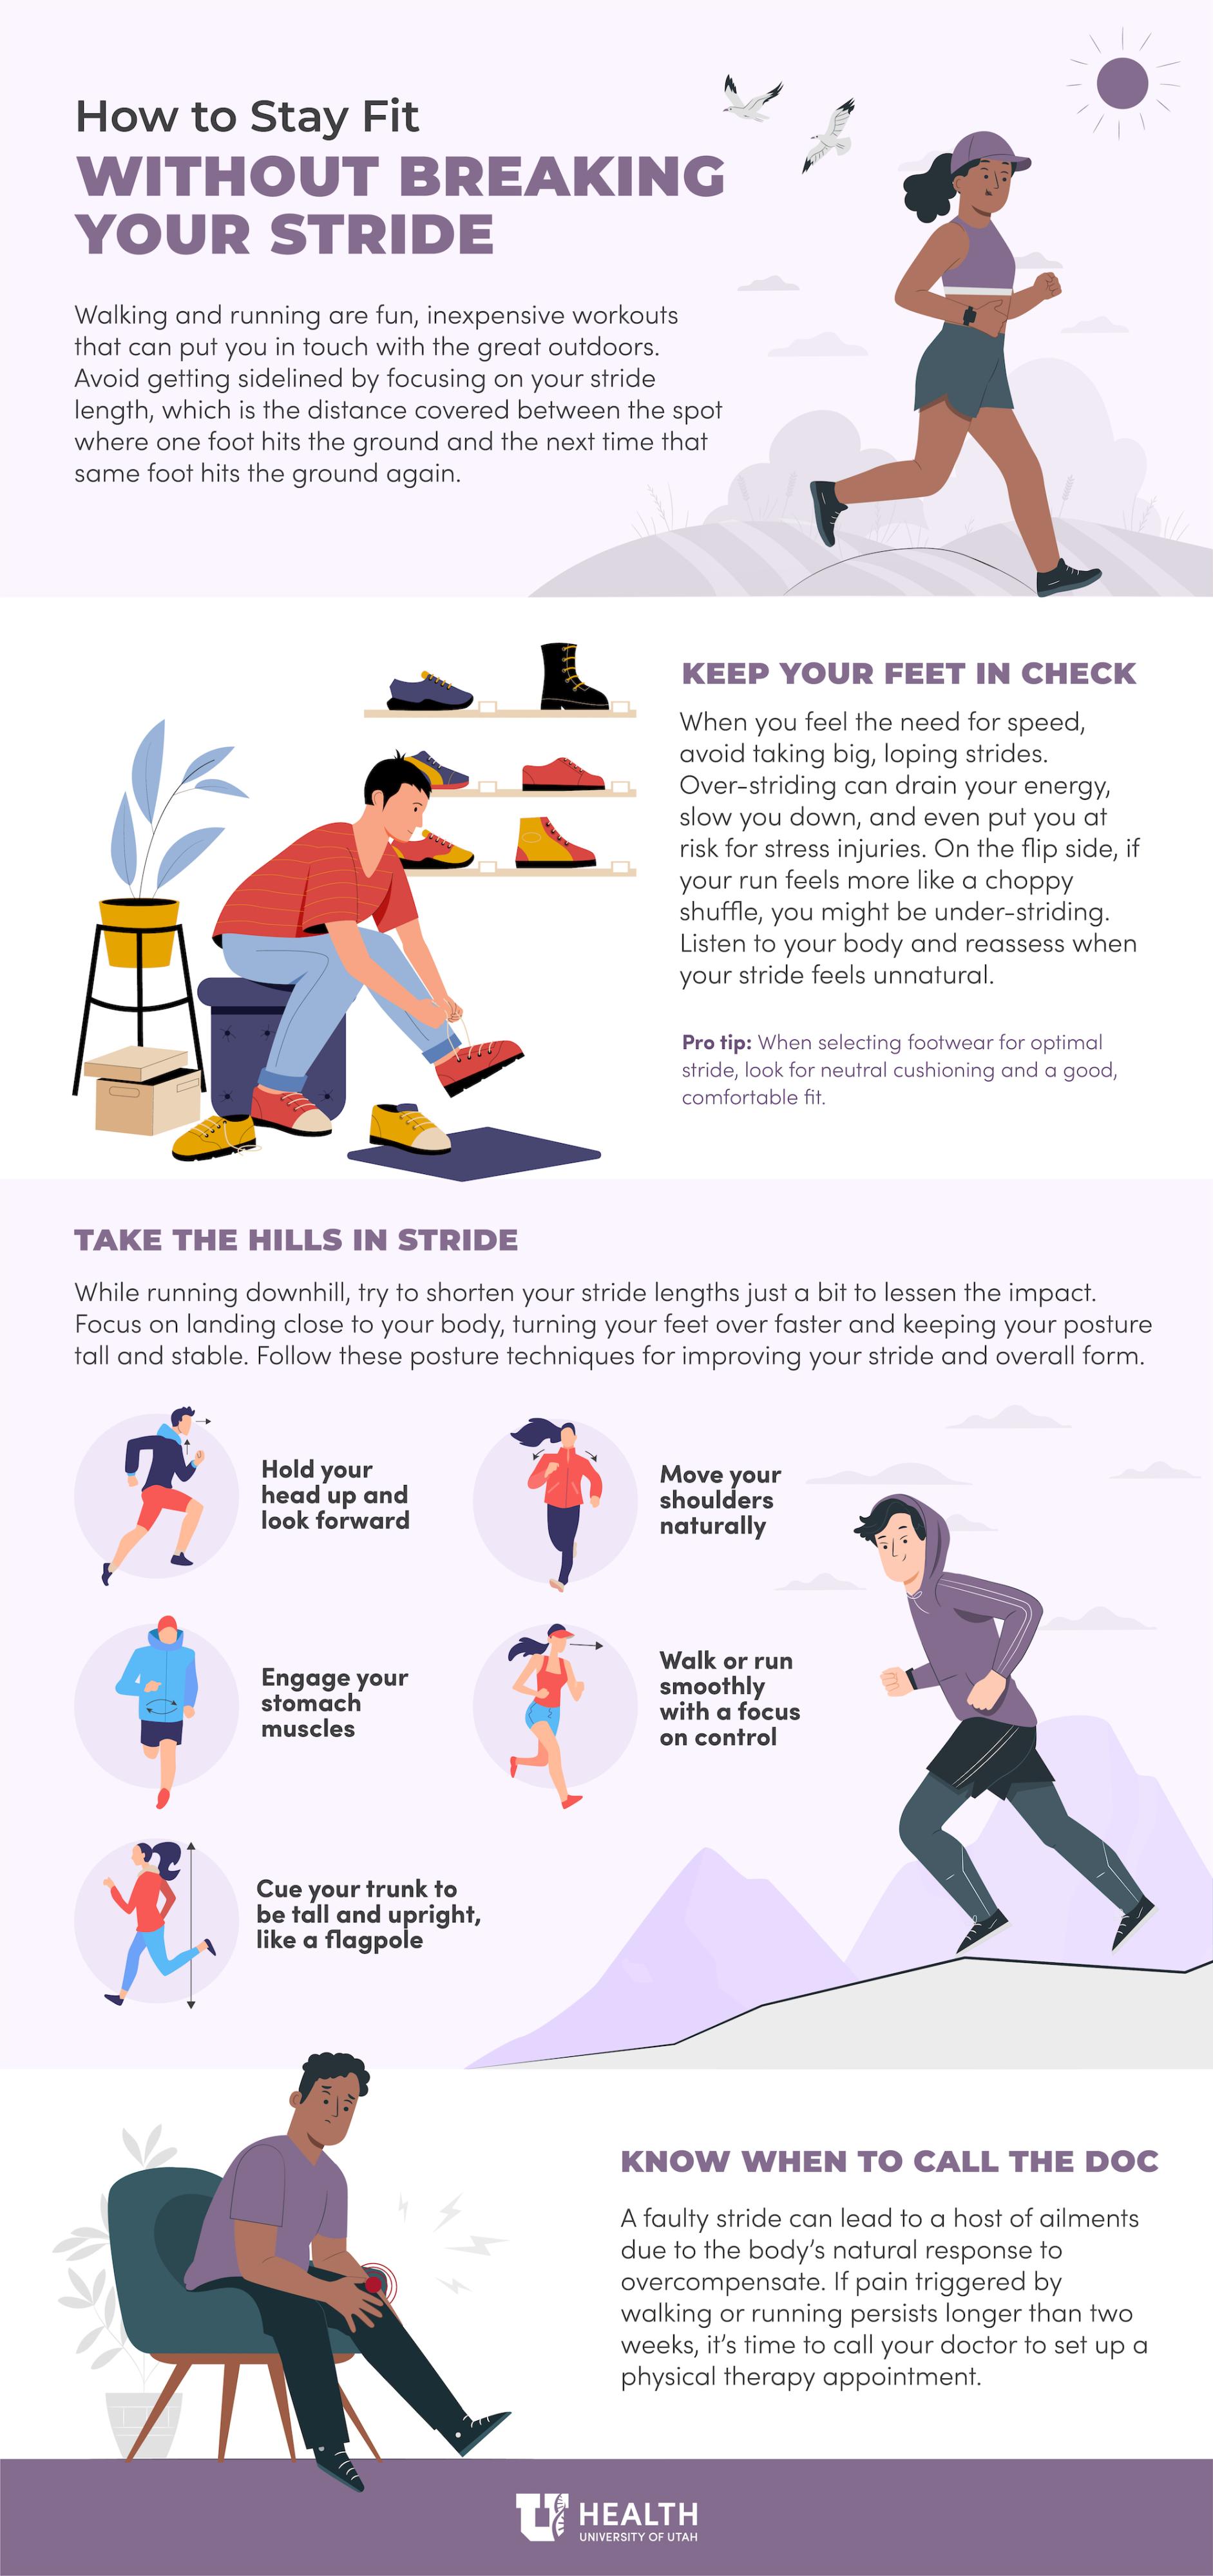 How to stay fit without breaking your stride